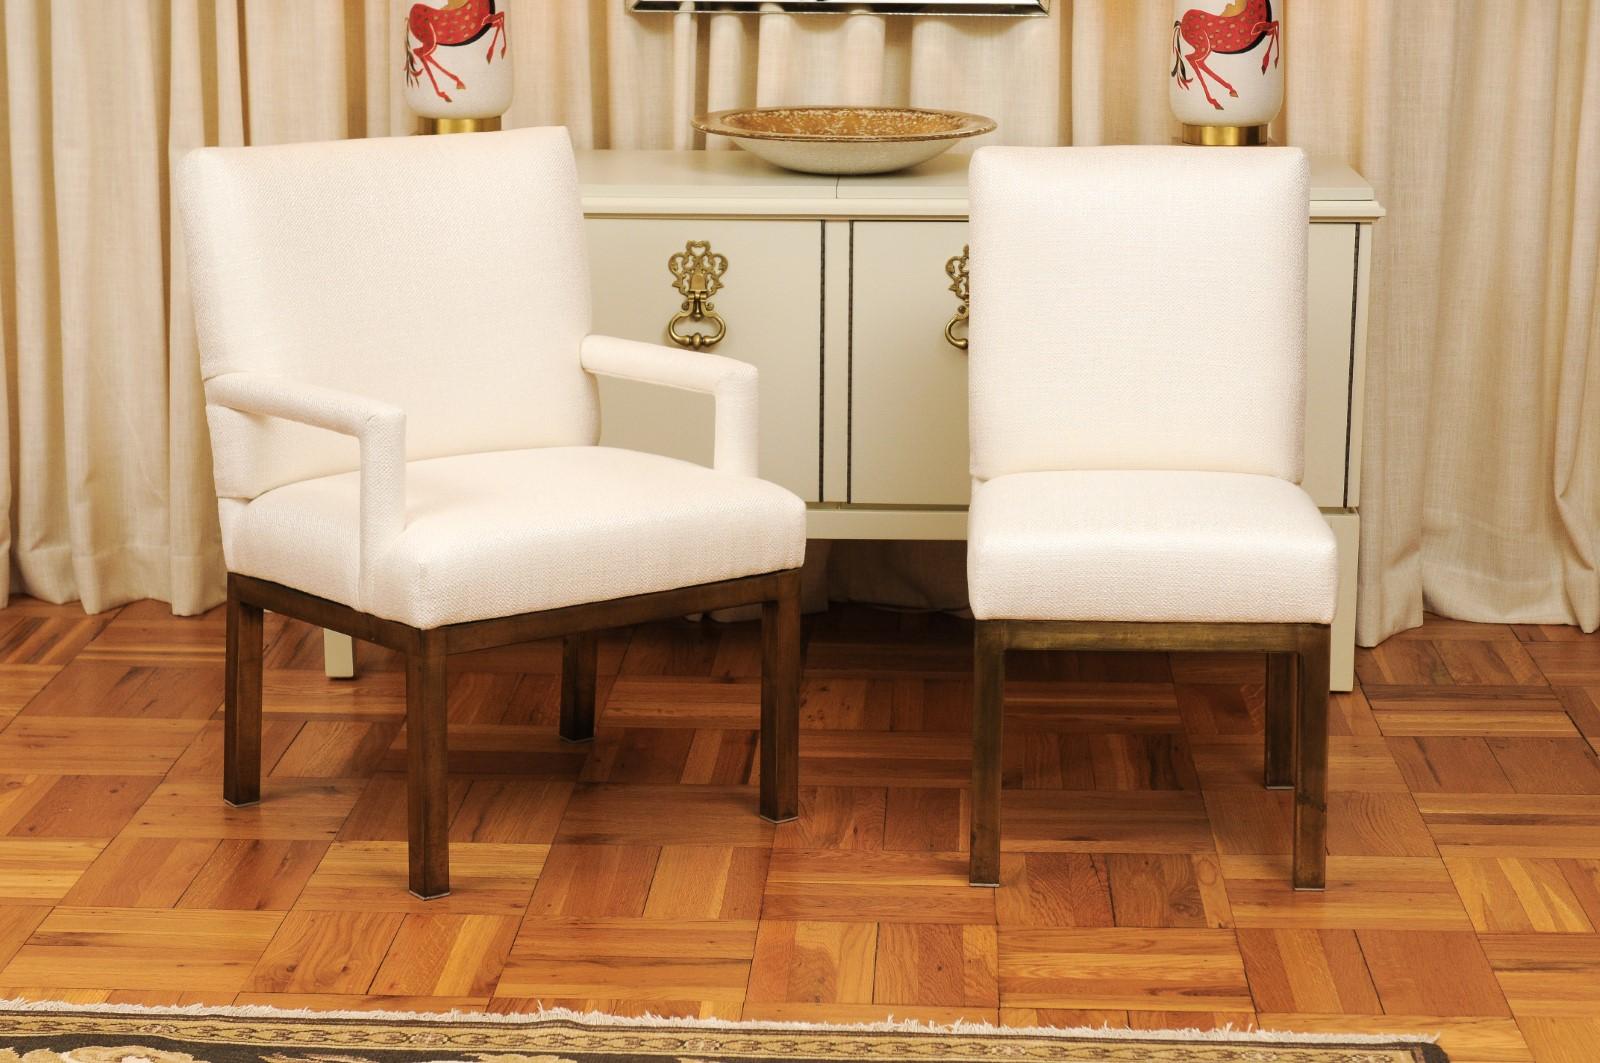 These magnificent dining chairs are shipped as professionally photographed and described in the listing narrative, completely installation ready. This large set is unique on the market. Expert custom upholstery service is available.

A stunning set